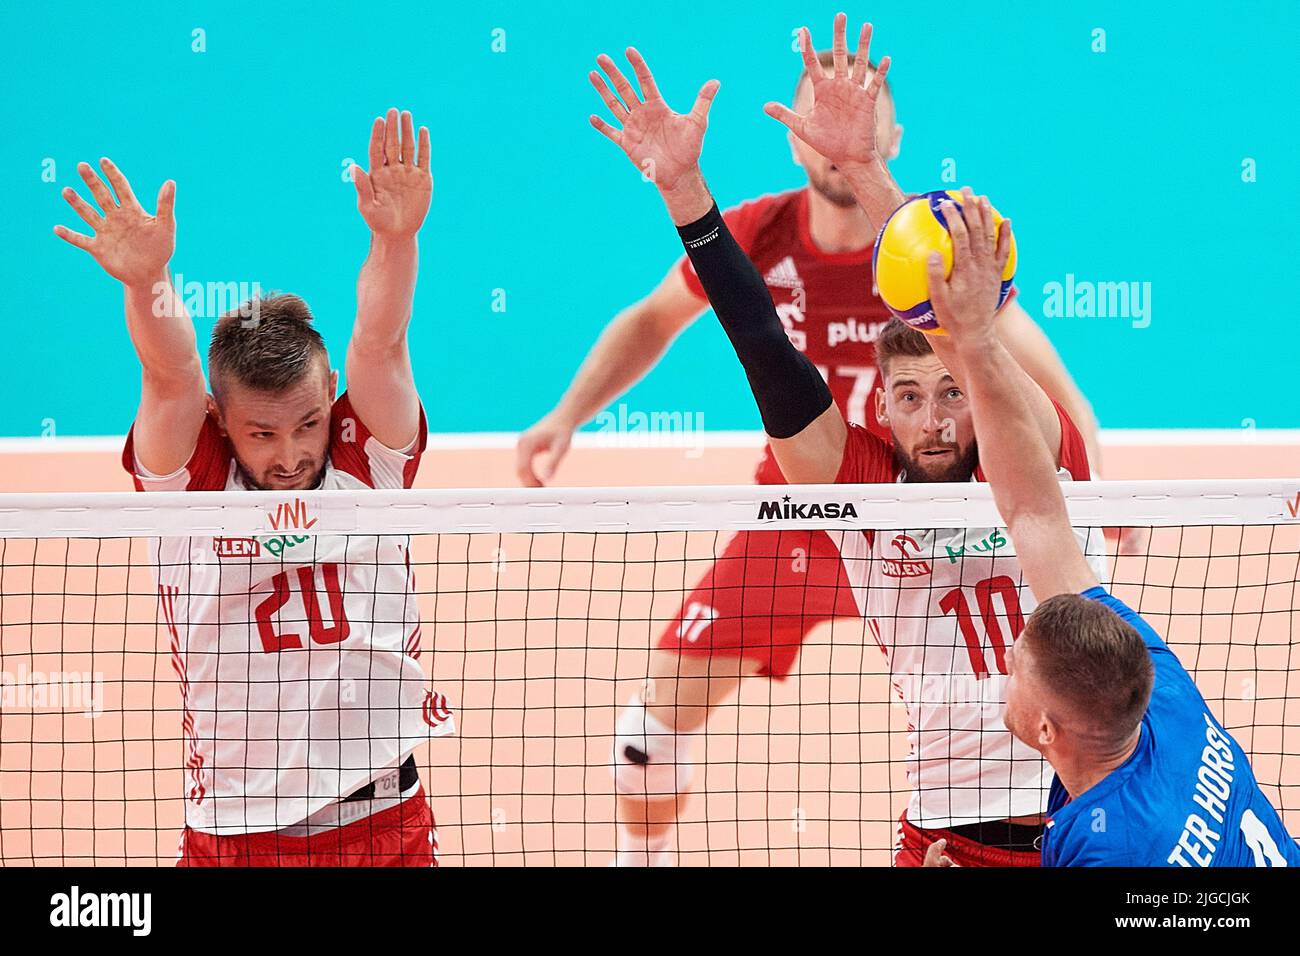 Gdansk, Poland. 09th July, 2022. Mateusz Bieniek (L) and Bartosz Bednorz (2R) of Poland and Thijs Ter Horst (R) of the Netherlands during the 2022 men's FIVB Volleyball Nations League match between Poland and the Netherlands in Gdansk, Poland, 09 July 2022. Credit: PAP/Alamy Live News Stock Photo